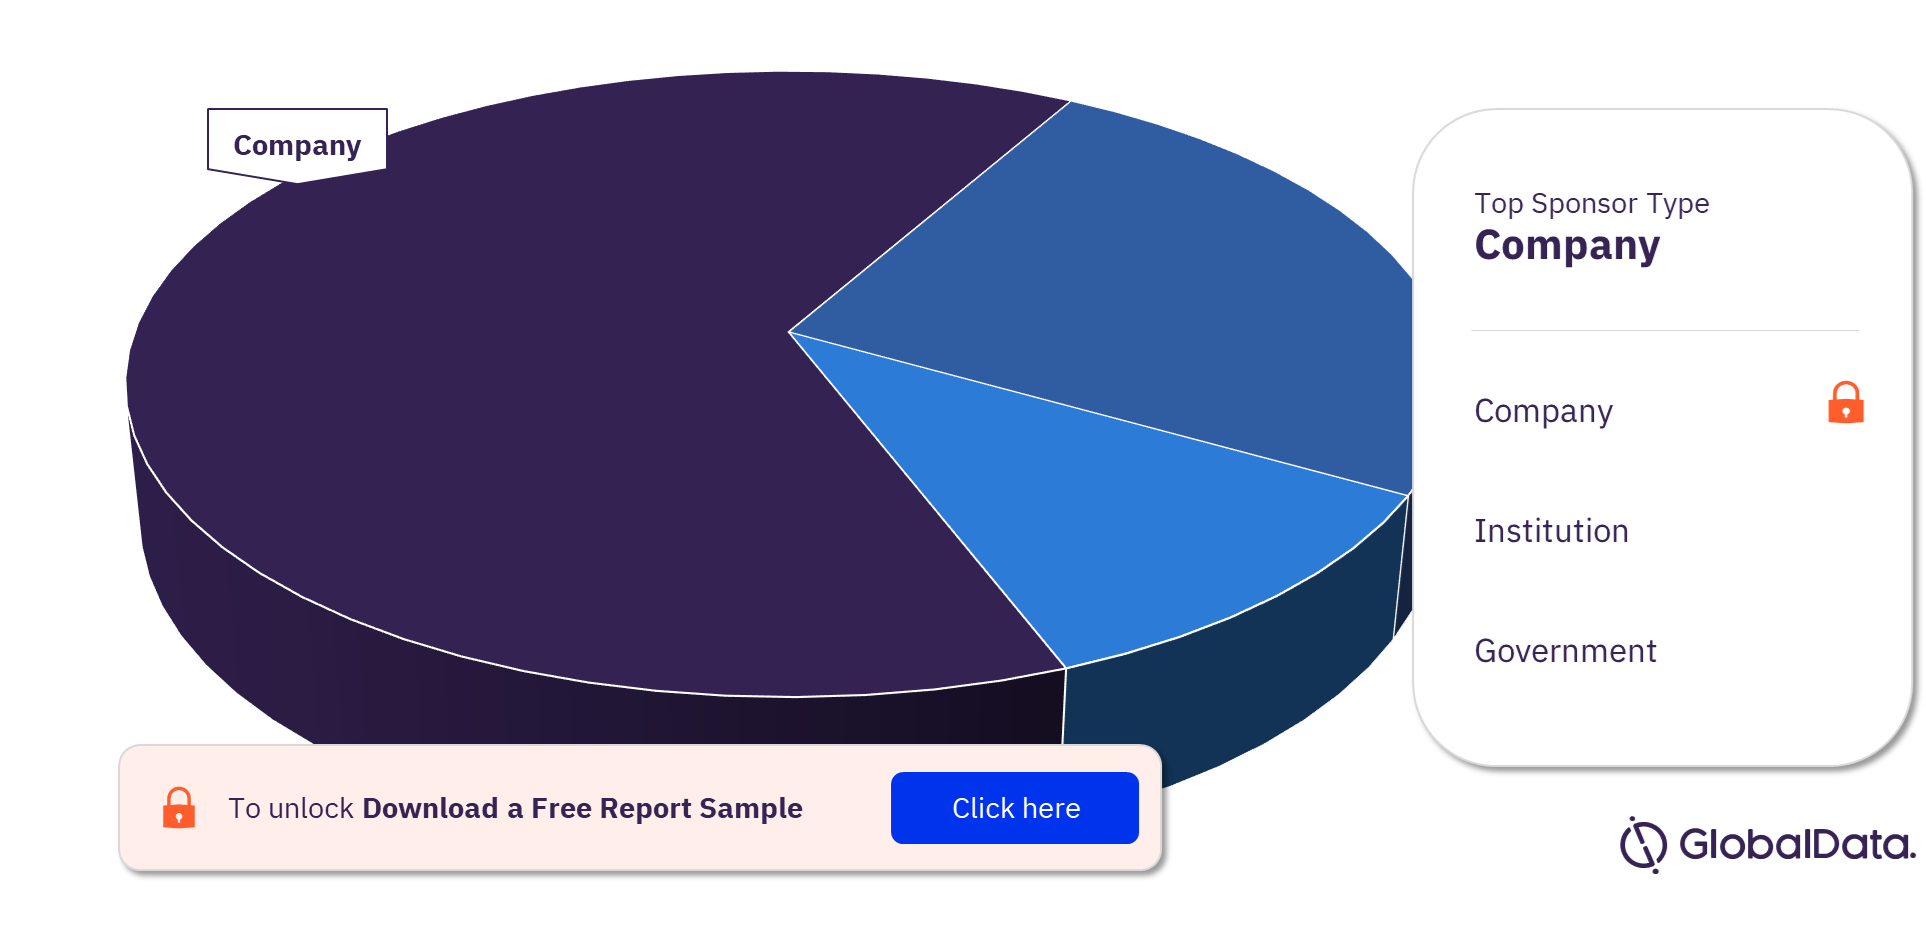 Restless Legs Syndrome Clinical Trials Market Analysis by Sponsor Types